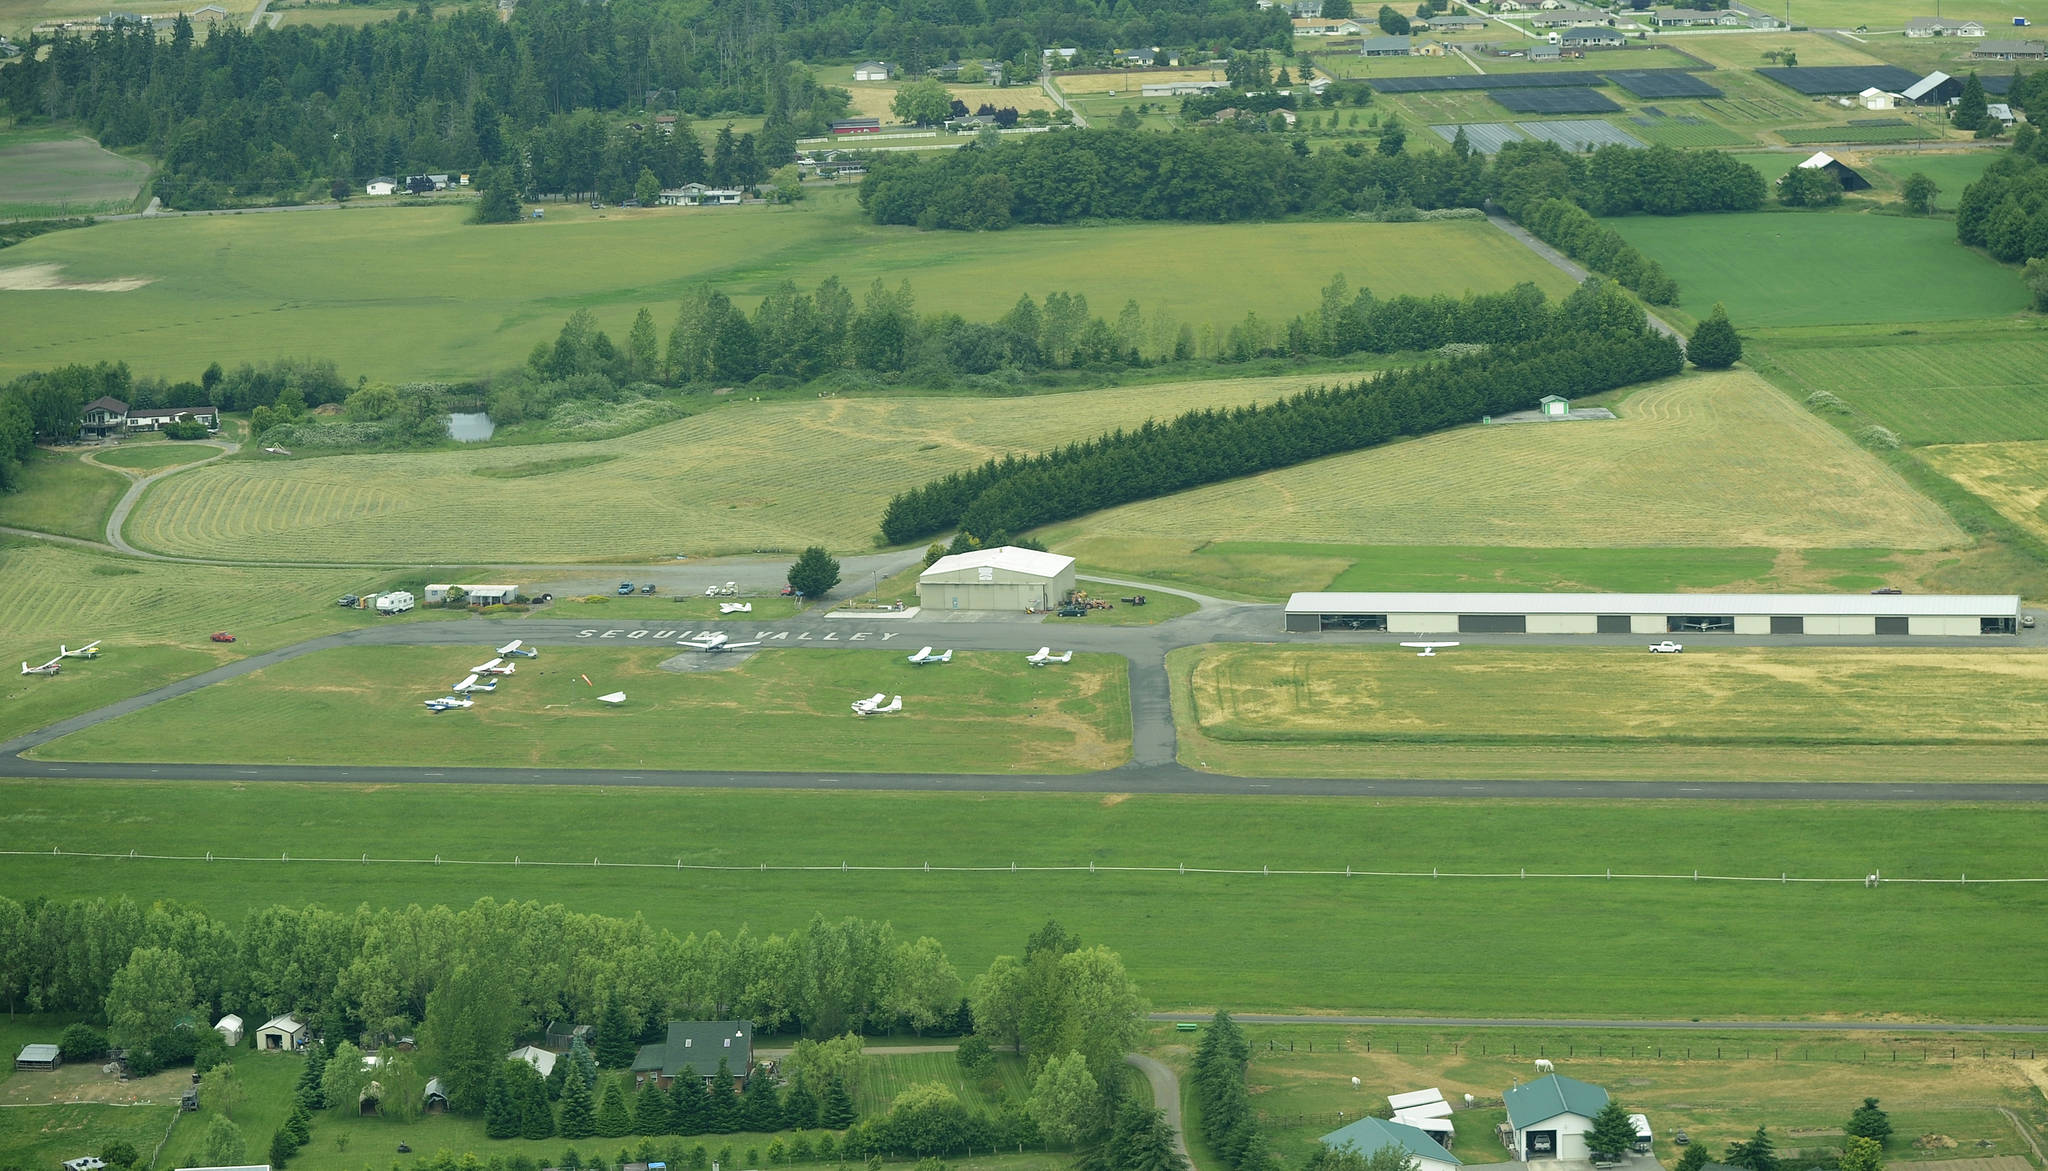 Sequim Valley Airport, pictured here in 2014, is for sale as president-manager Andy Sallee looks to write a new chapter in the community airport’s story. Sequim Gazette file photo by Michael Dashiell